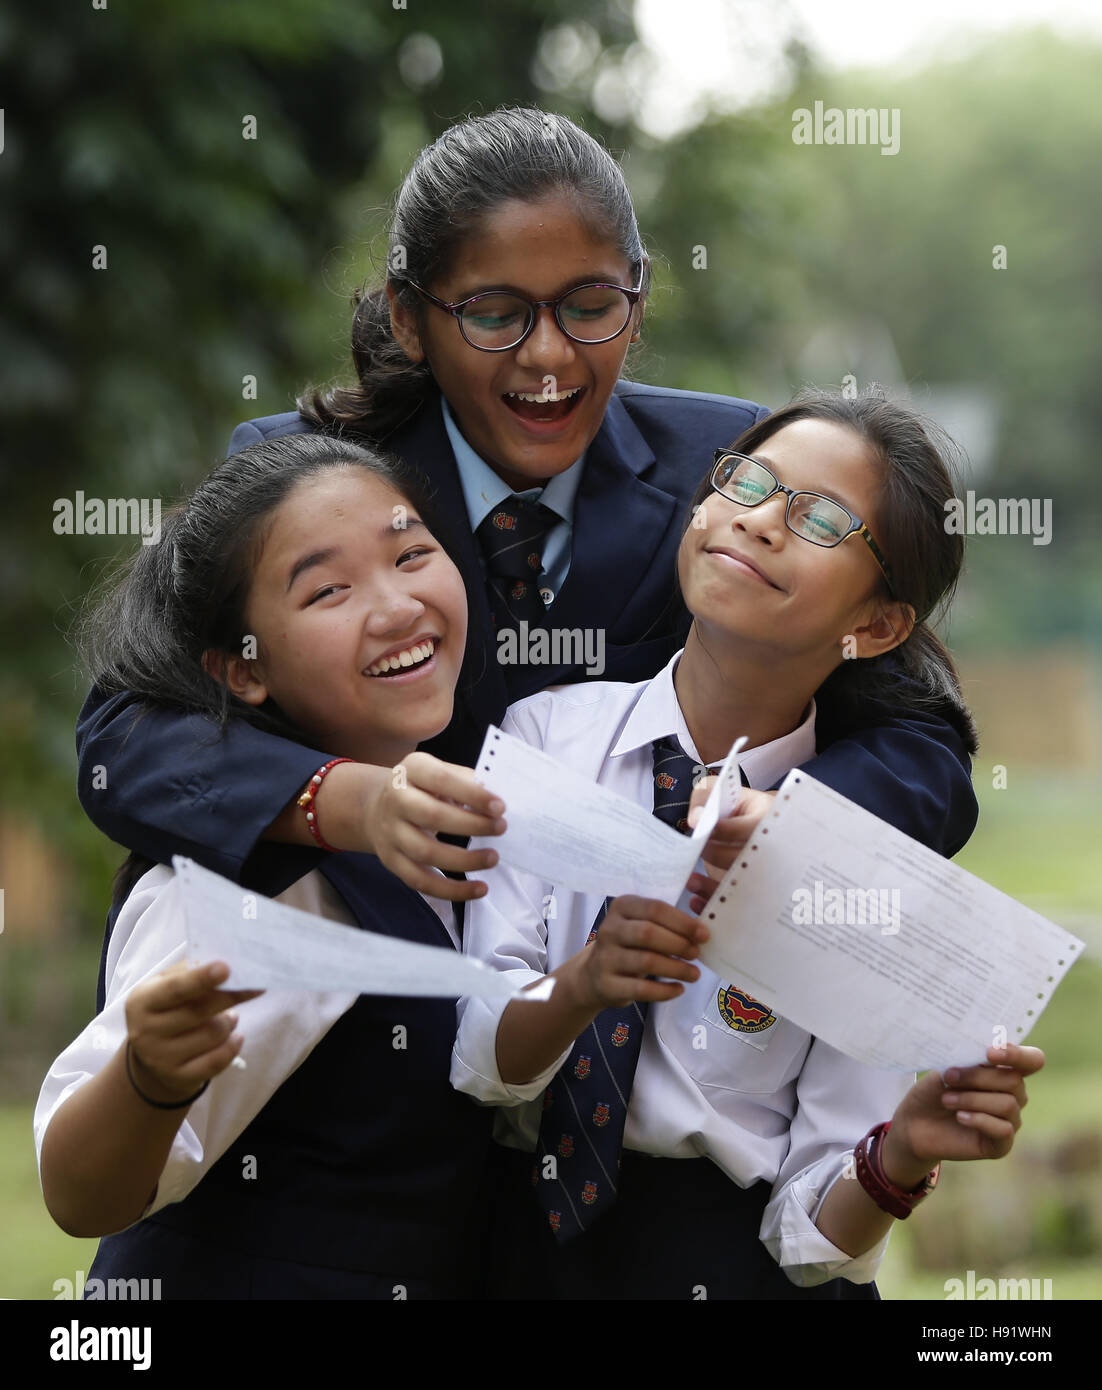 Kuala Lumpur, Malaysia. 17th Nov 2016. Multiracial elementary school students share the joy after achieving exam results. Stock Photo